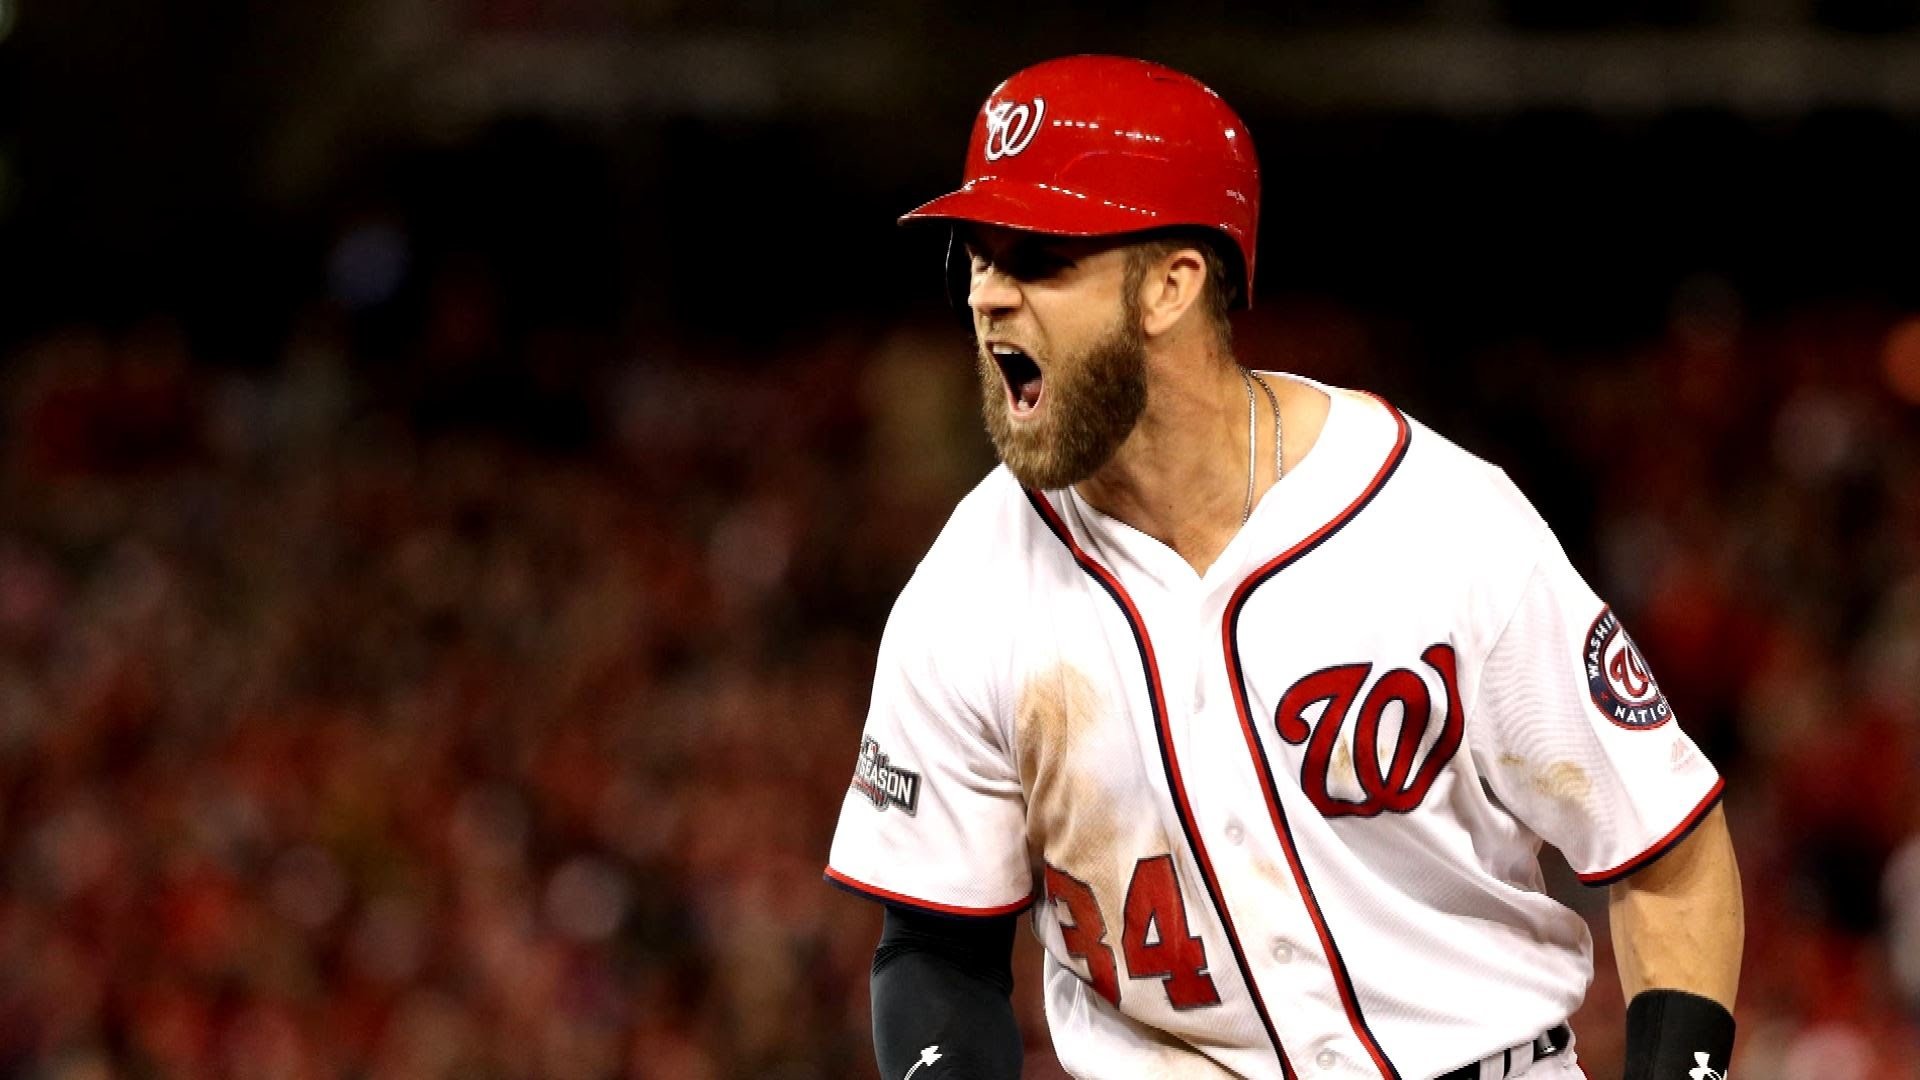 1920x1080 Is Bryce Harper worth his asking price?